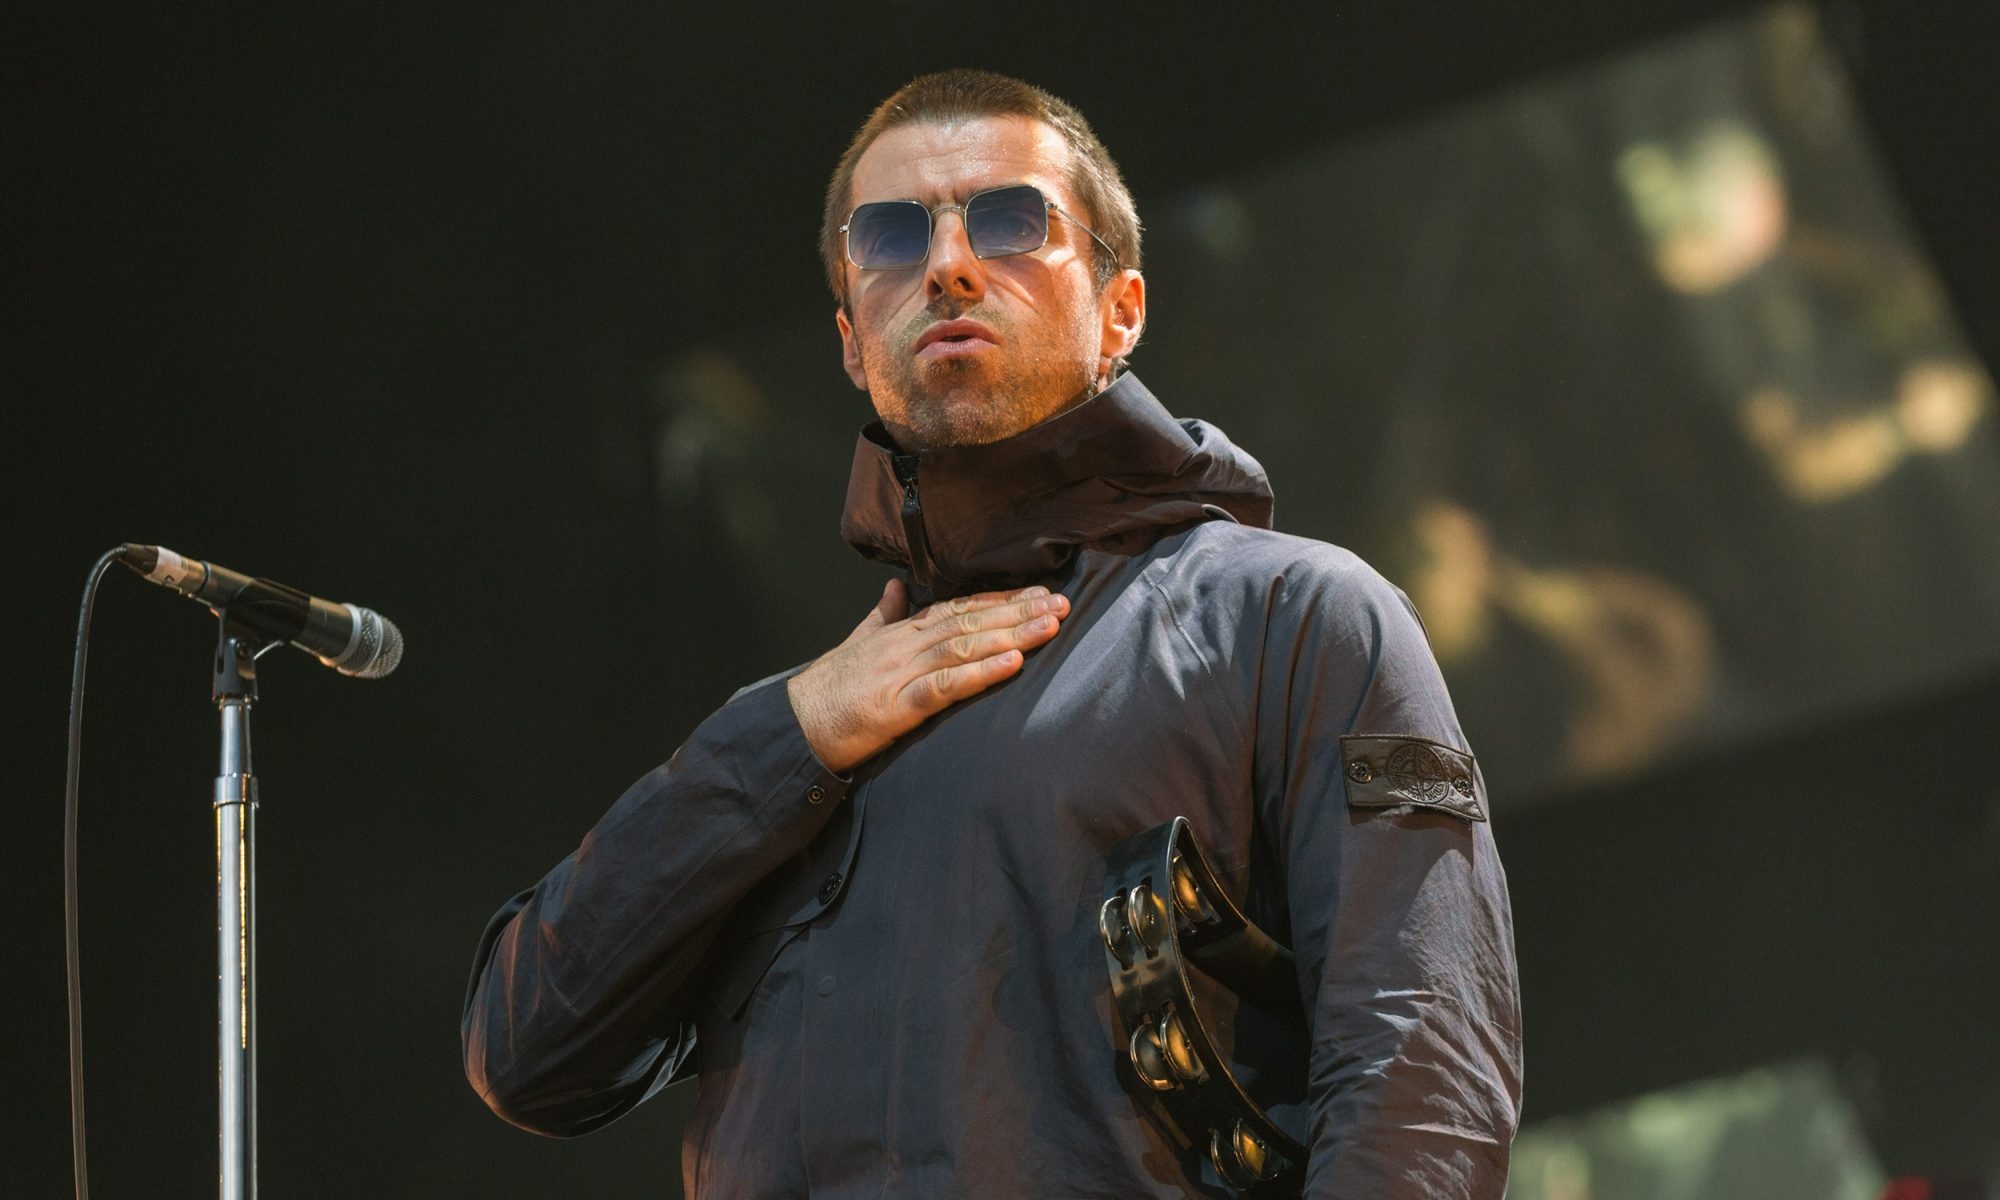 Watch Liam Gallagher's Expletive-Laden Rant About Tea | MyRecipes 2000x1200